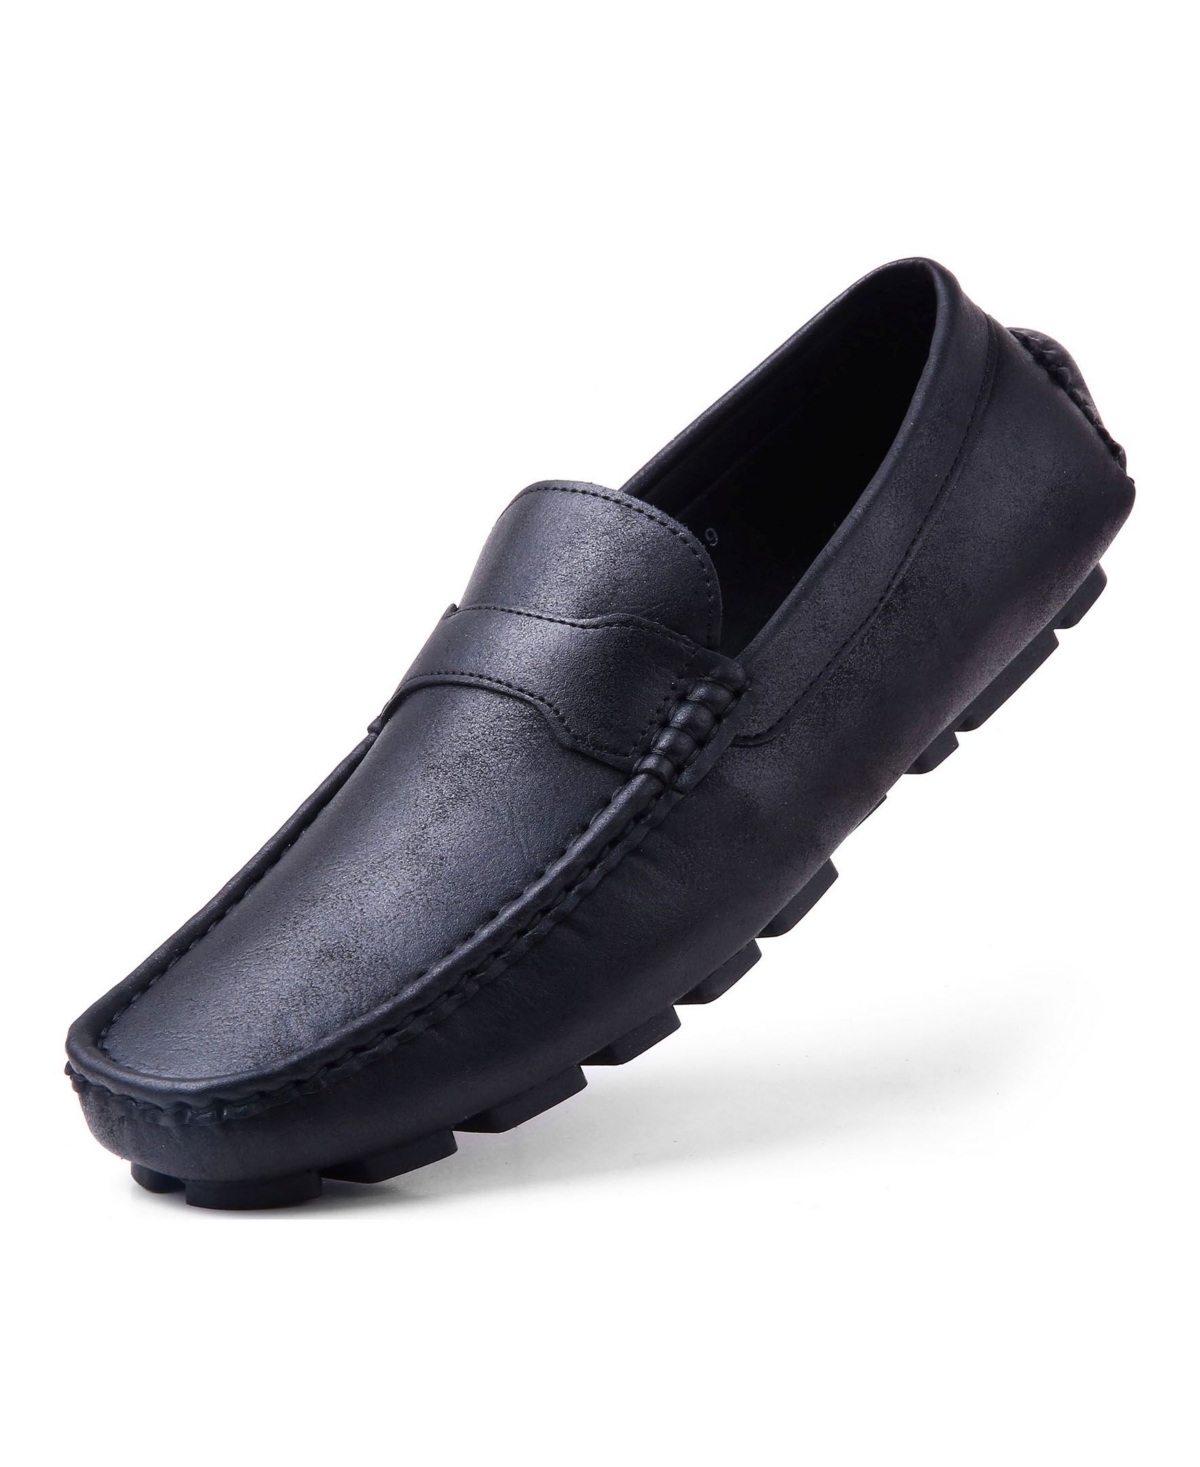 Gallery Seven Men's Casual Driving Loafers Men's Shoes